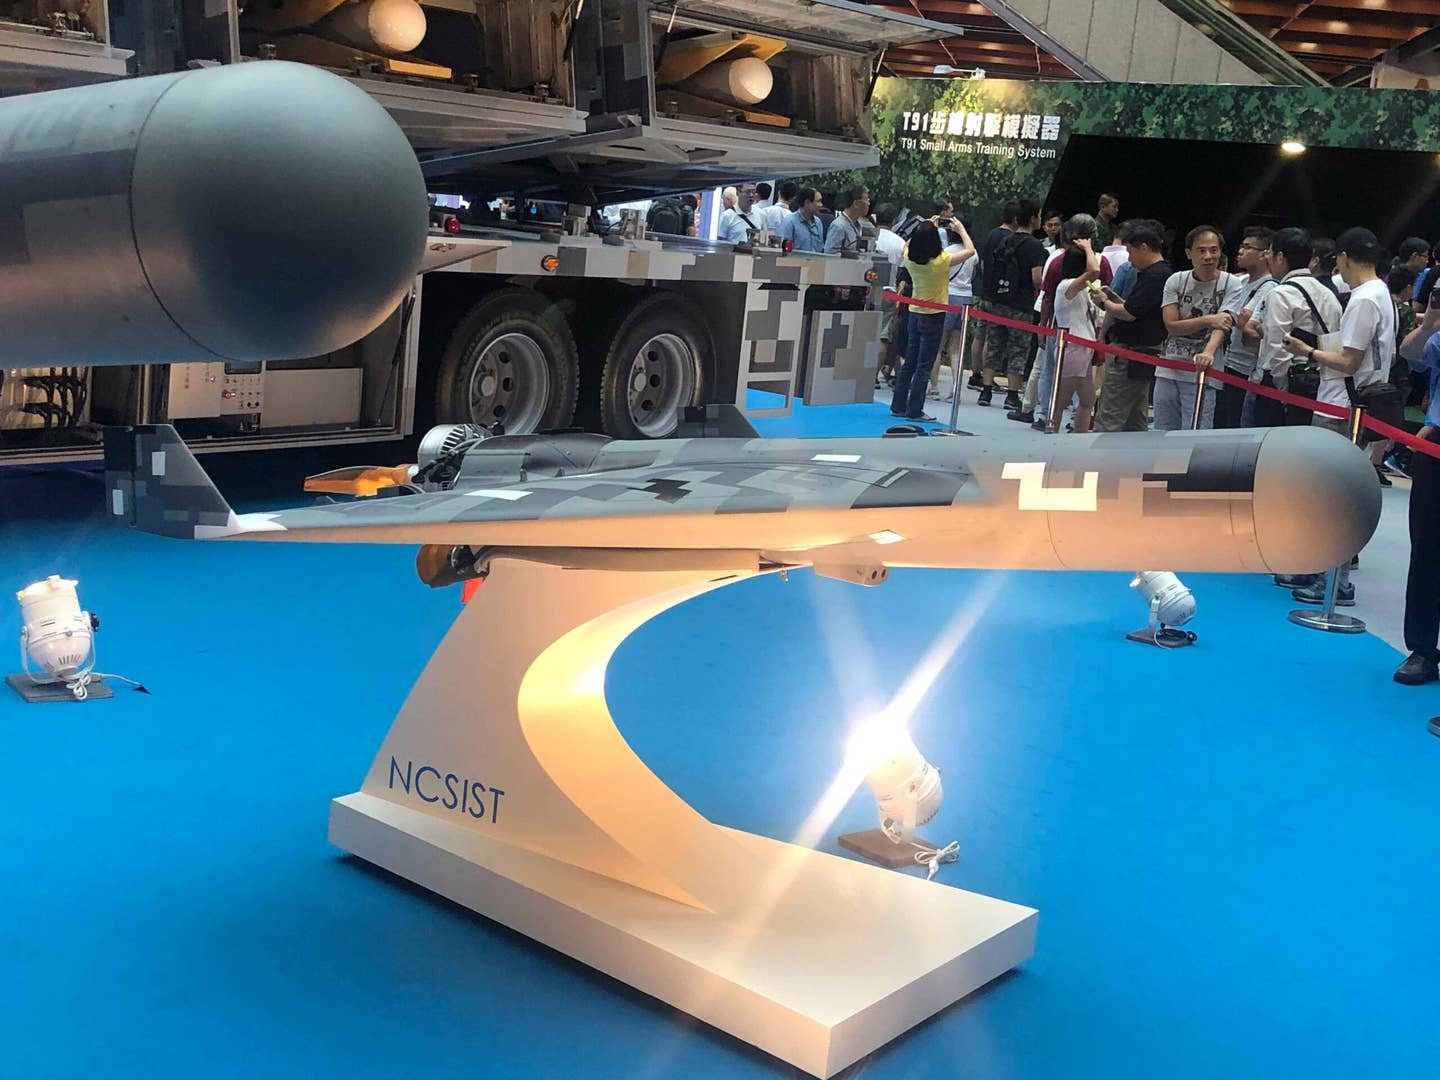 The Chien Hsiang loitering munition on display at the 2019 Taipei Aerospace &amp; Defense Technology Exhibition. <em>Credit: Kenchen945/Wikimedia Commons</em>